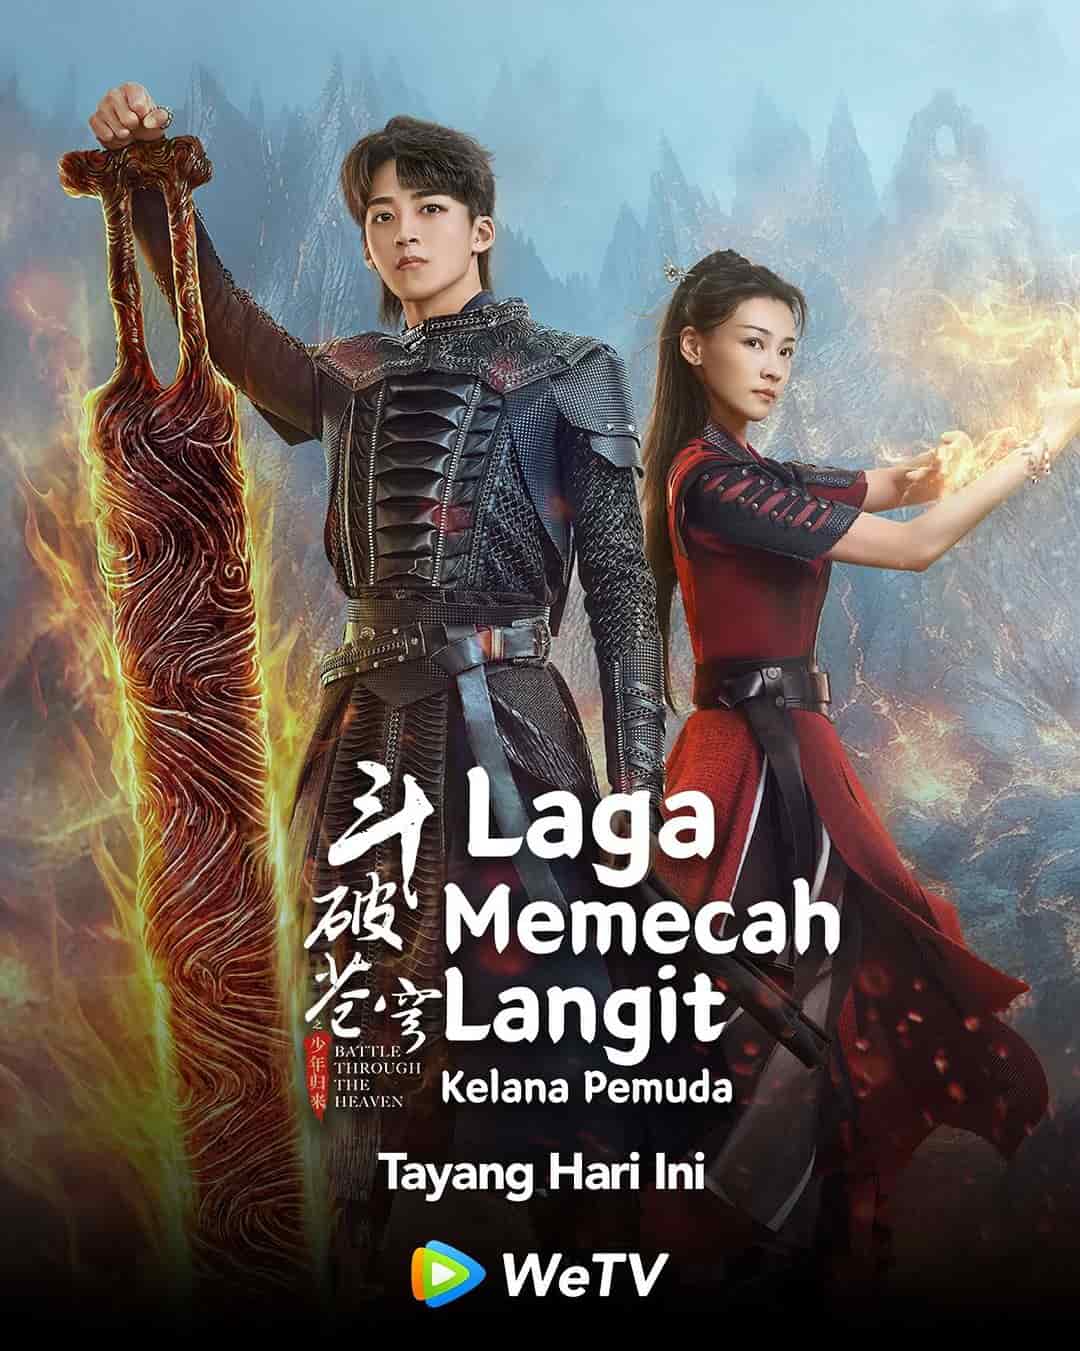 Battle Through The Heaven S2 - Sinopsis, Pemain, OST, Episode, Review